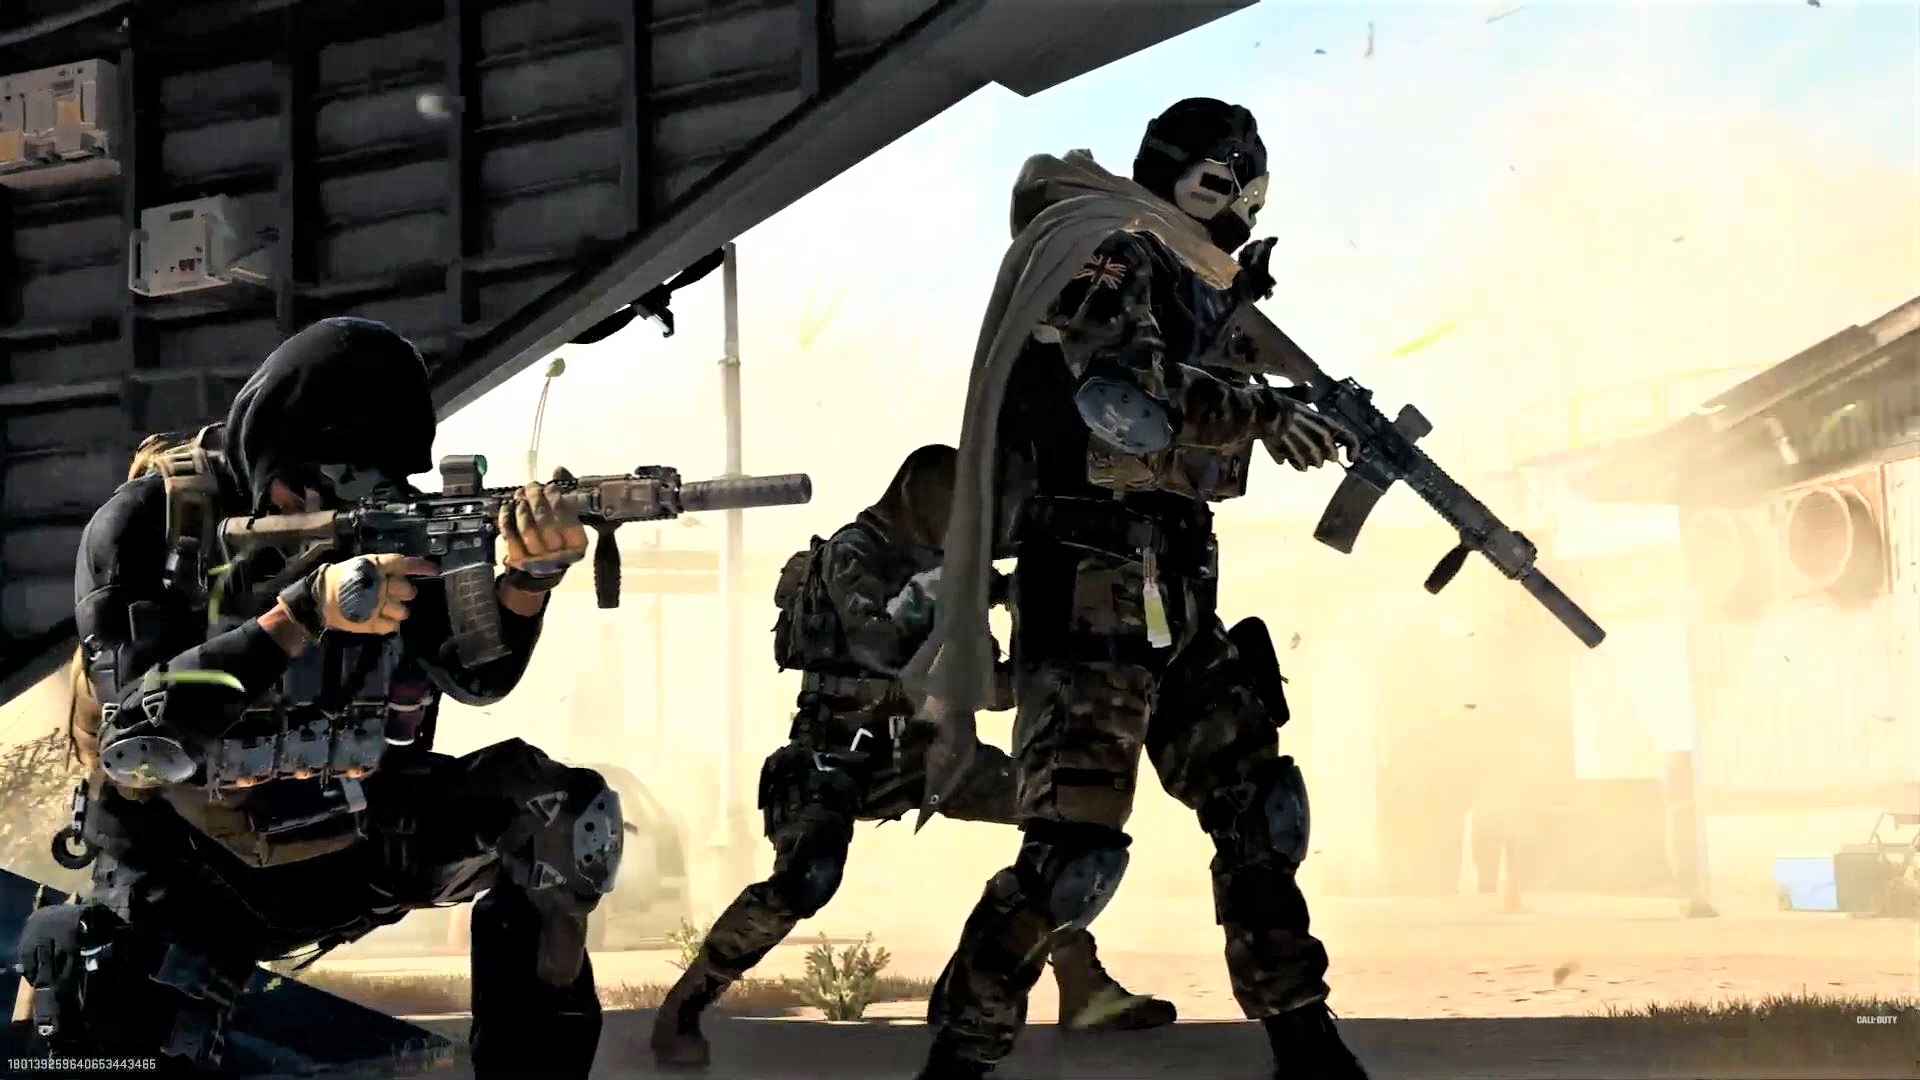 Silhouettes of armed soldiers in Call of Duty Modern Warfare 2